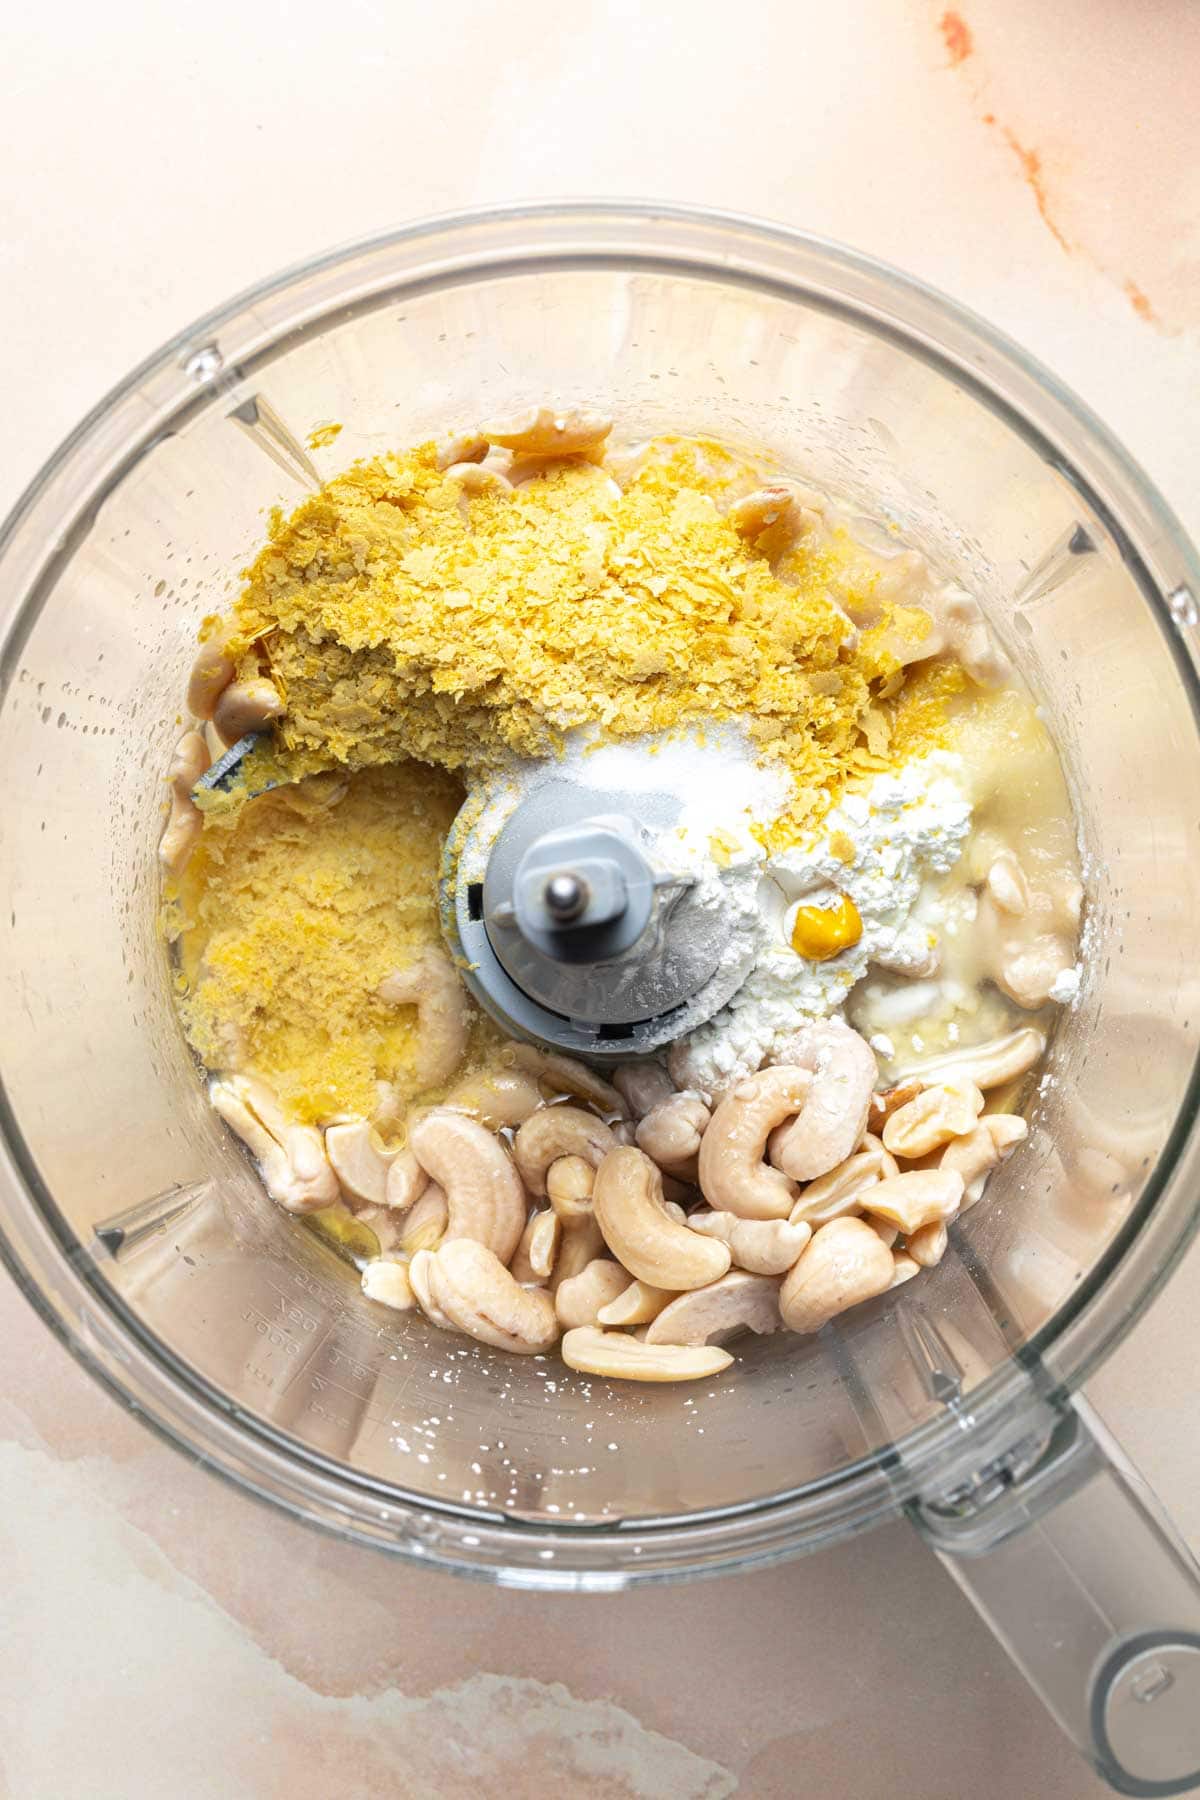 Cashews and other vegan cheese ingredients in a food processor.